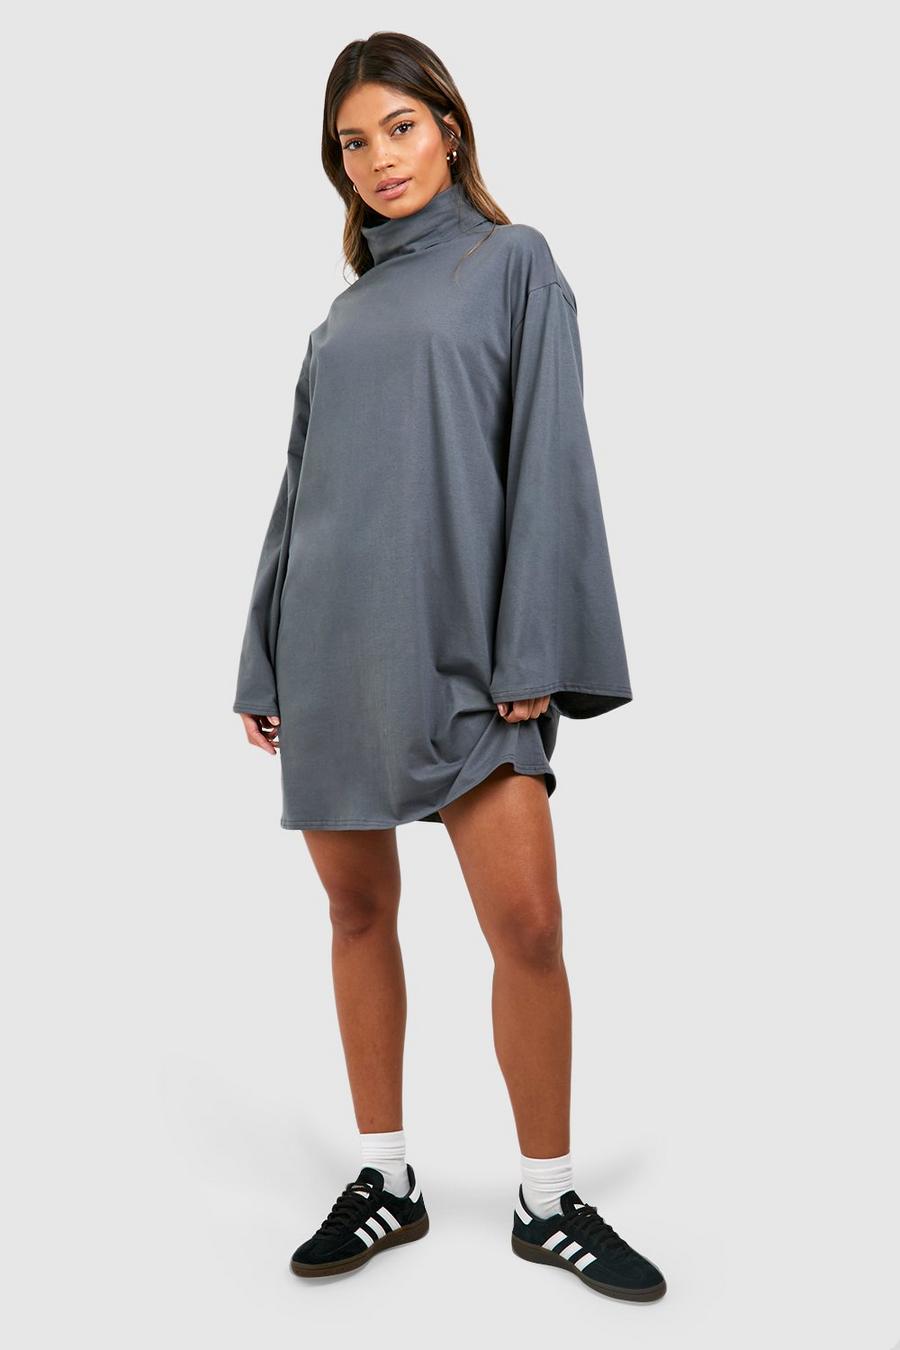 Charcoal grey Roll Neck Flare Sleeve Cotton T-shirt Dress